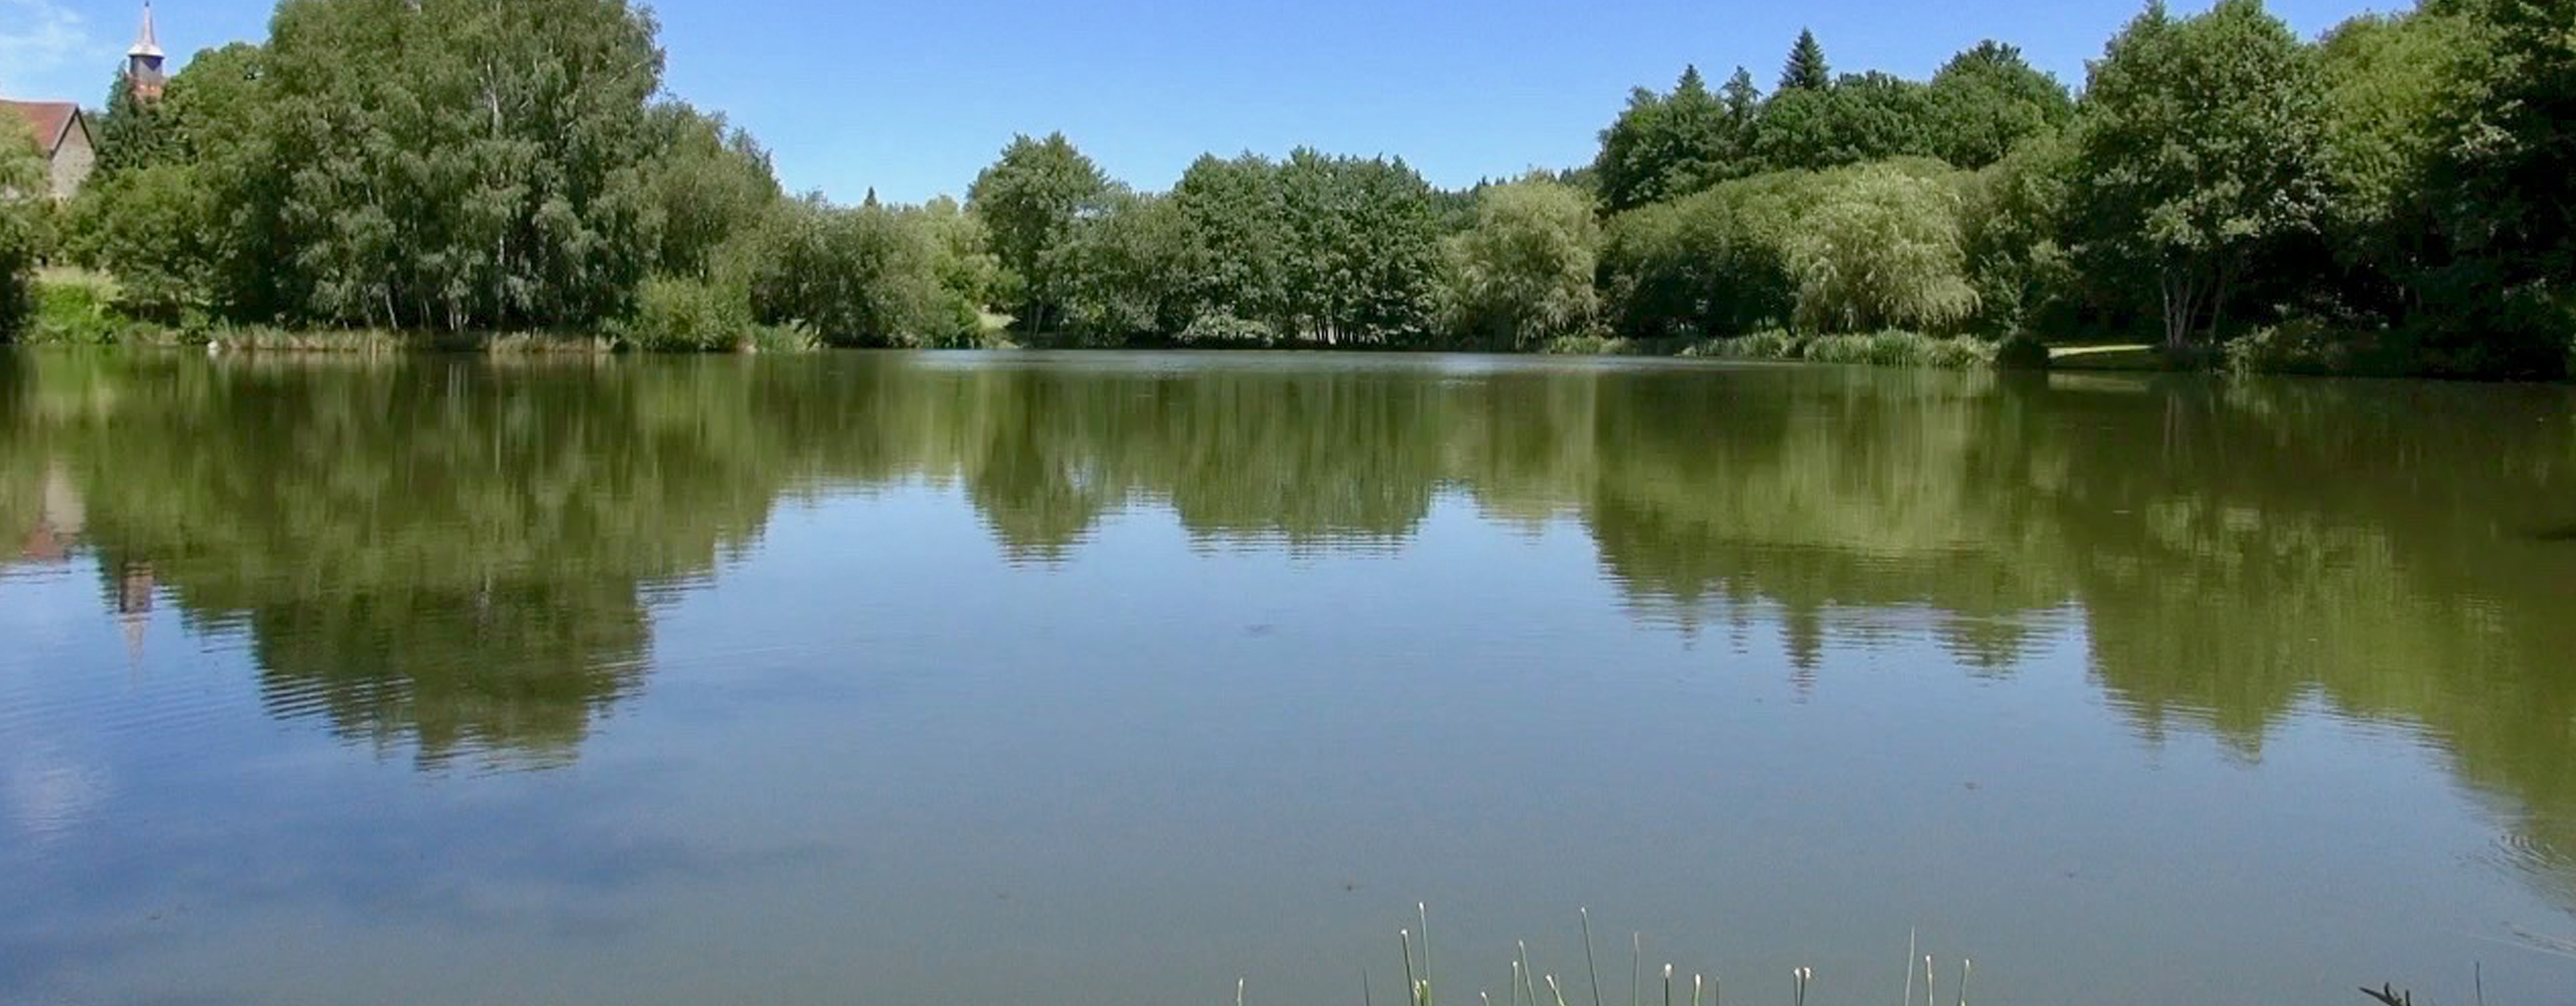 Tranquil and private fishing lake in France Etang de Azat-Chatenet